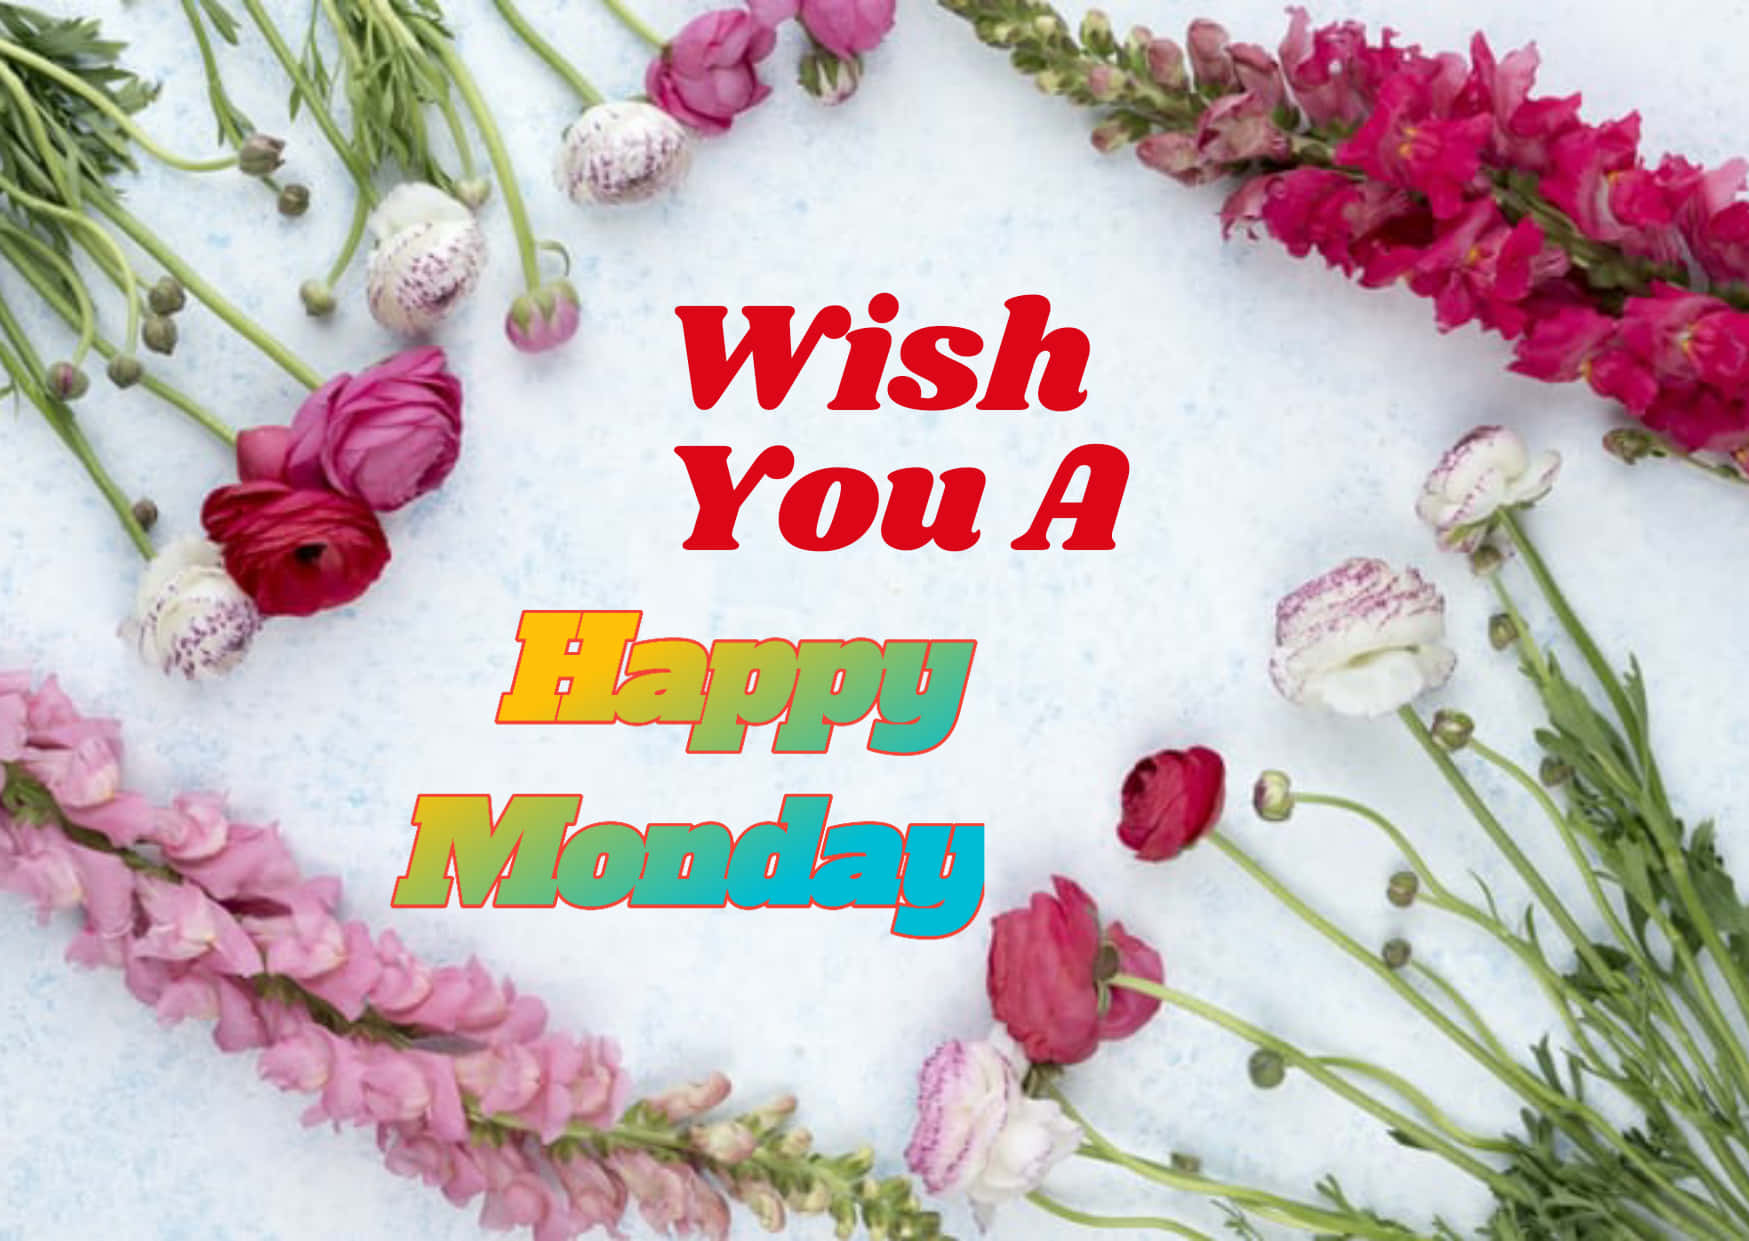 Happy Monday Wishes Flowers Picture